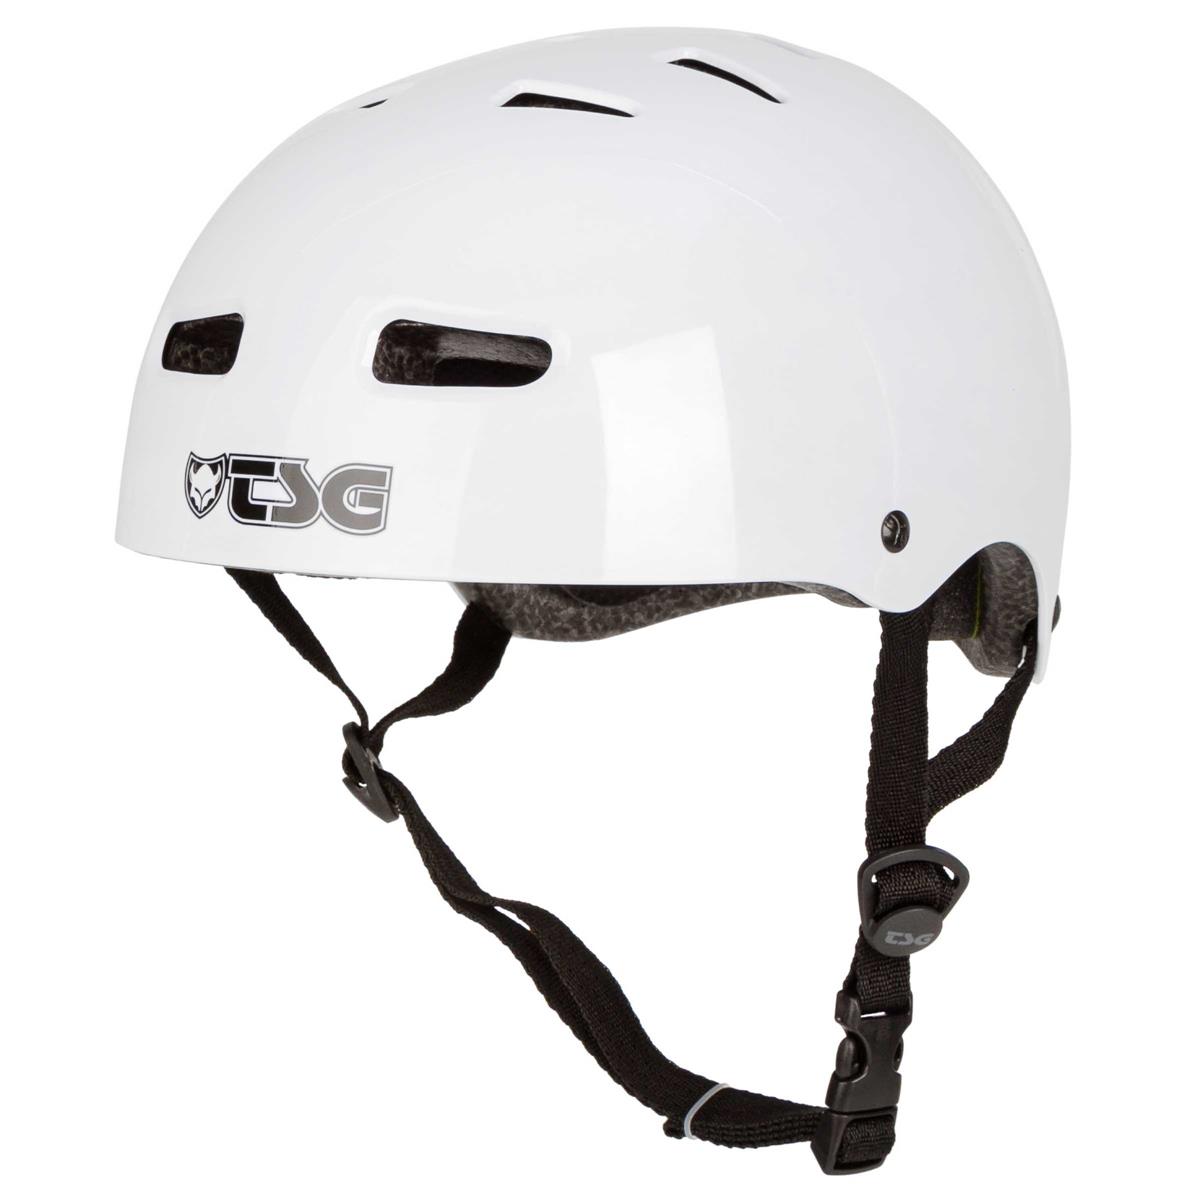 TSG BMX/Dirt Helm Skate/BMX Injected Color - Injected White